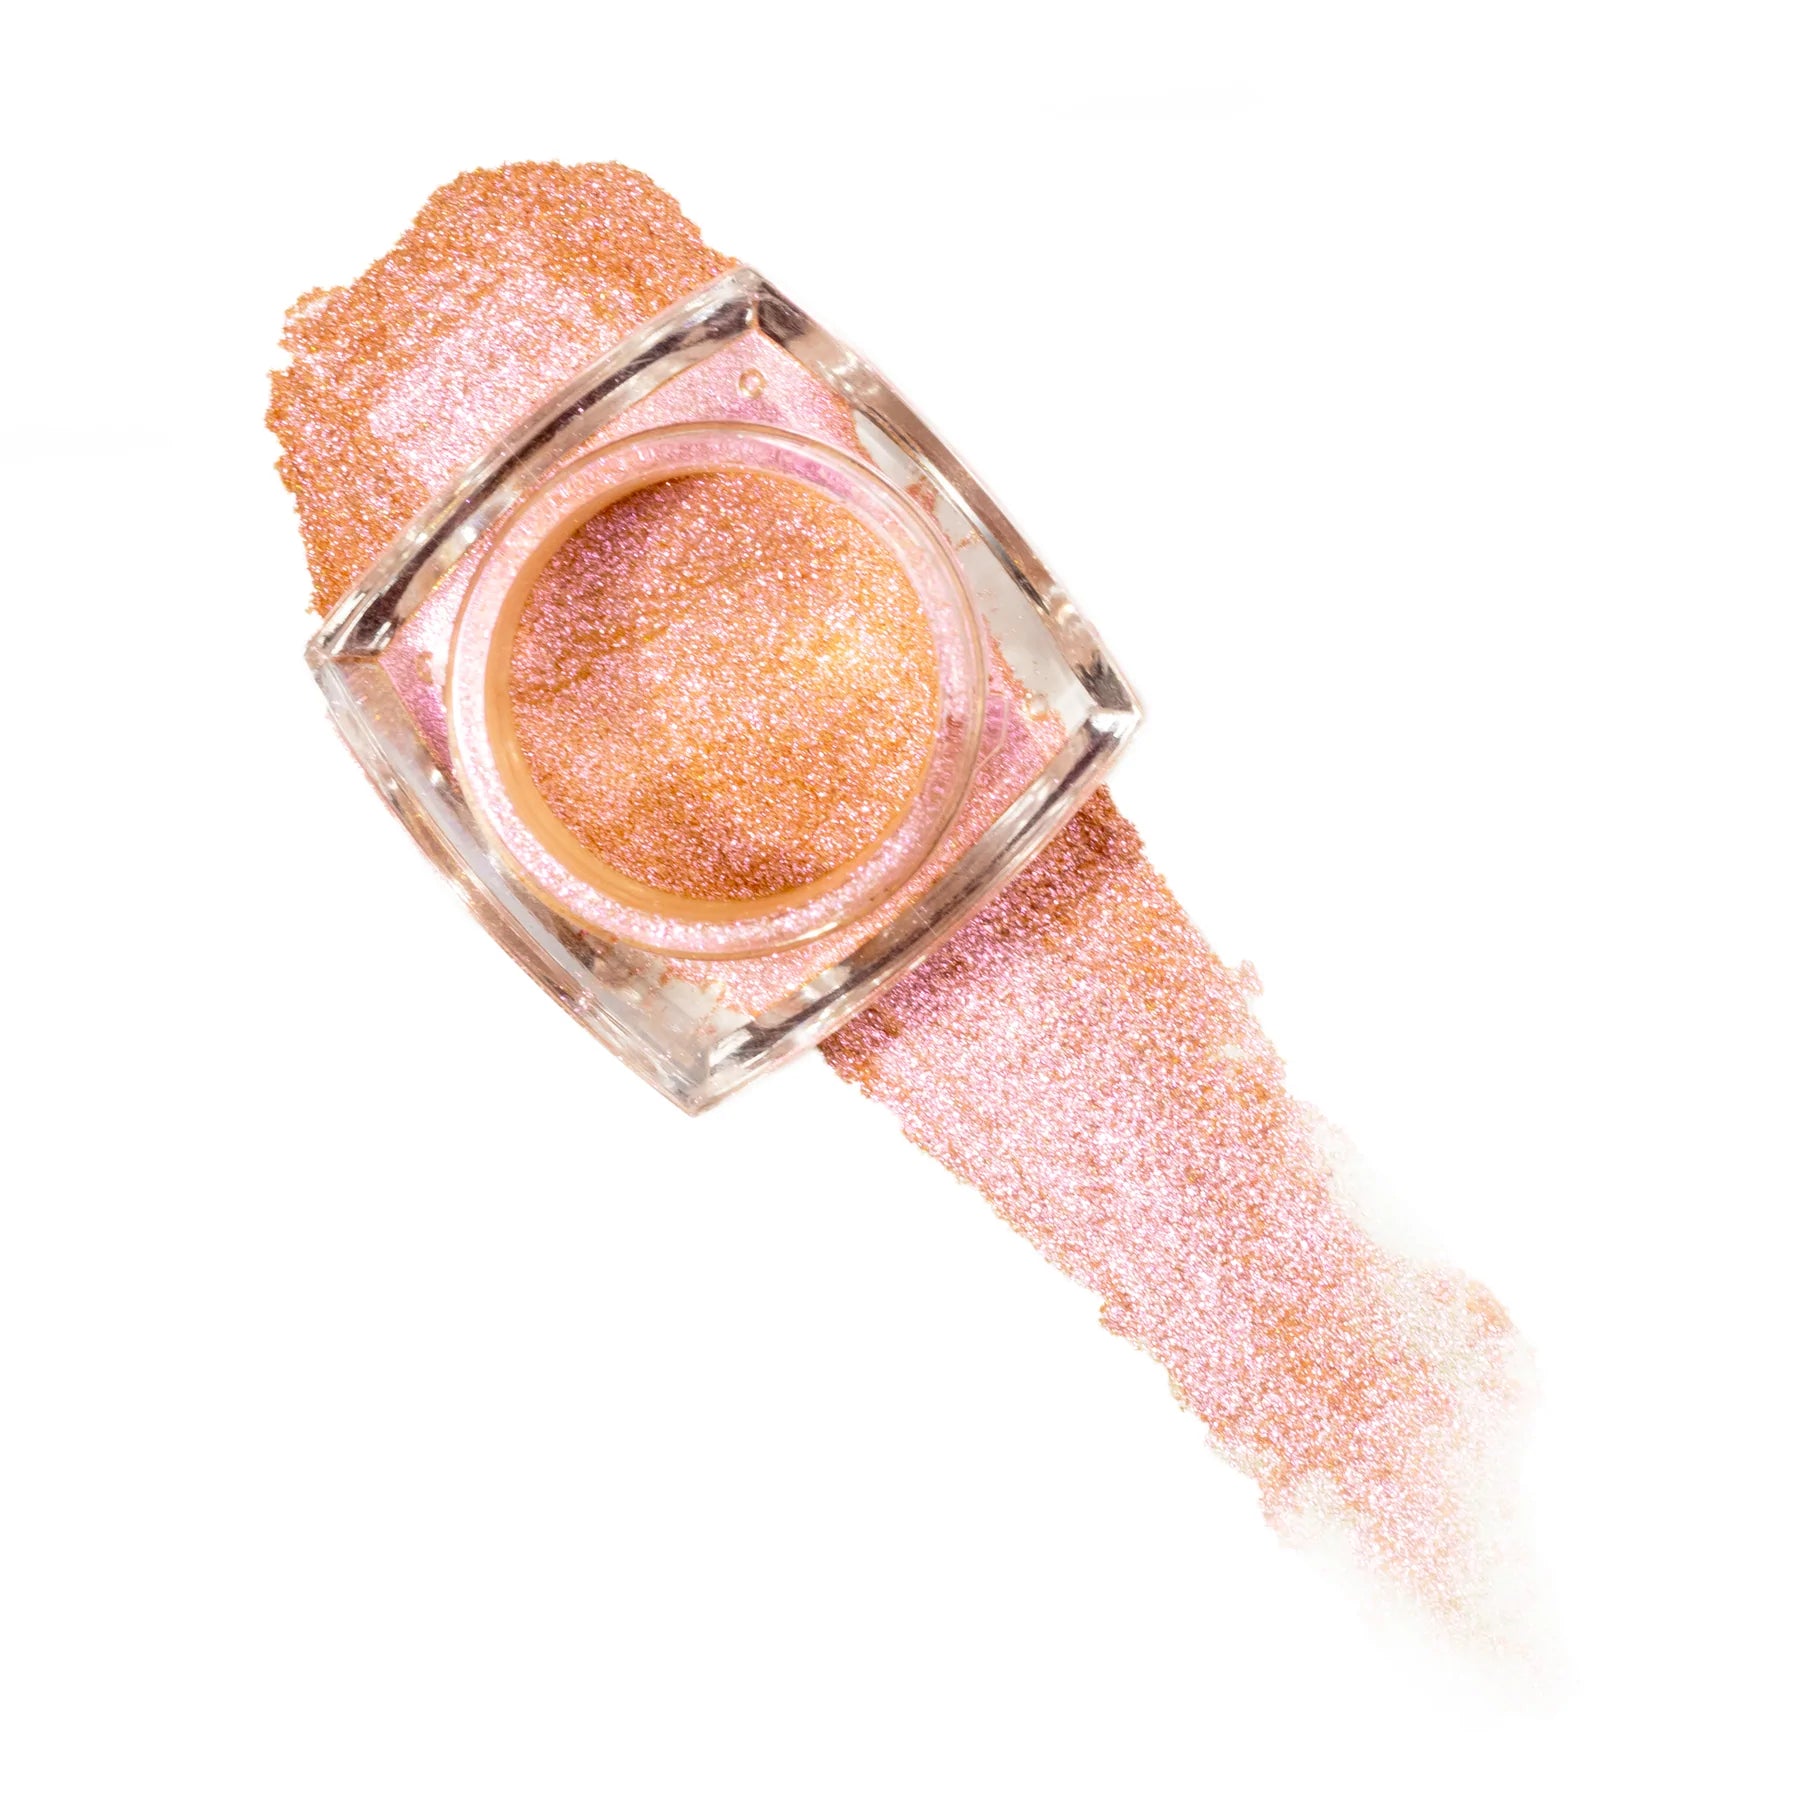 With Love Cosmetics - Loose Pigment Fairy Dust